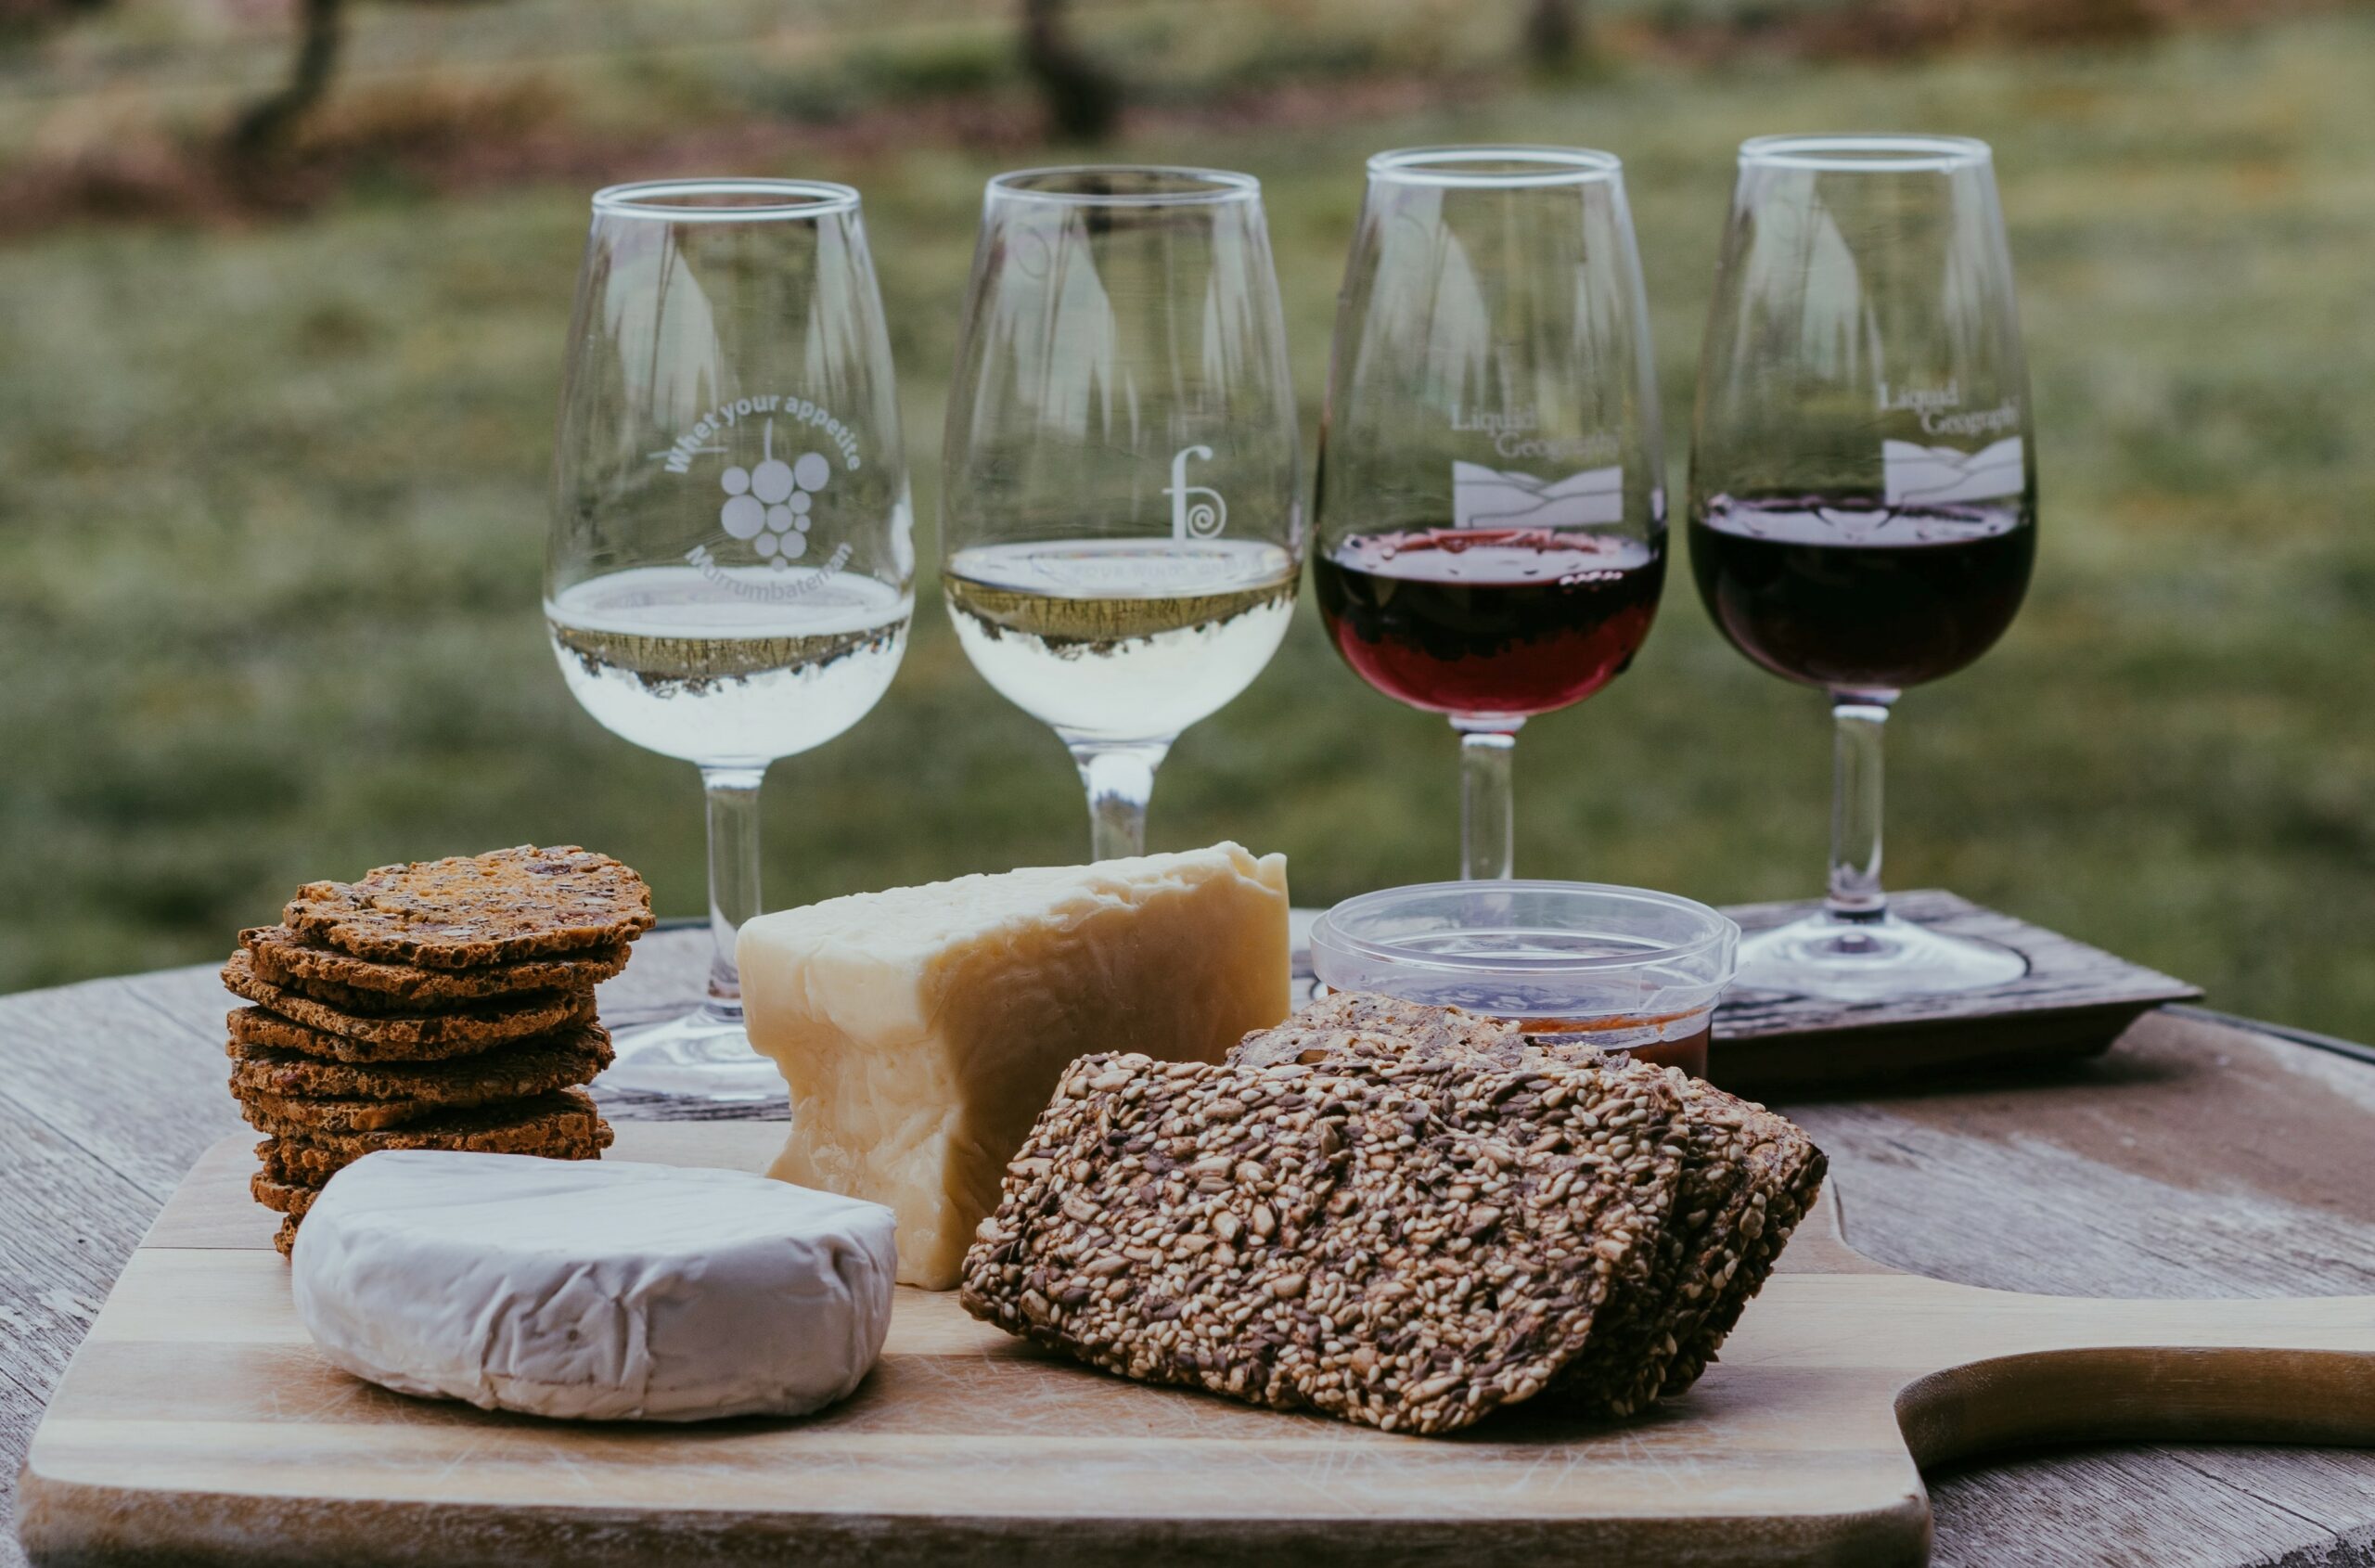 Pairing wine and cheese: everything you need to know